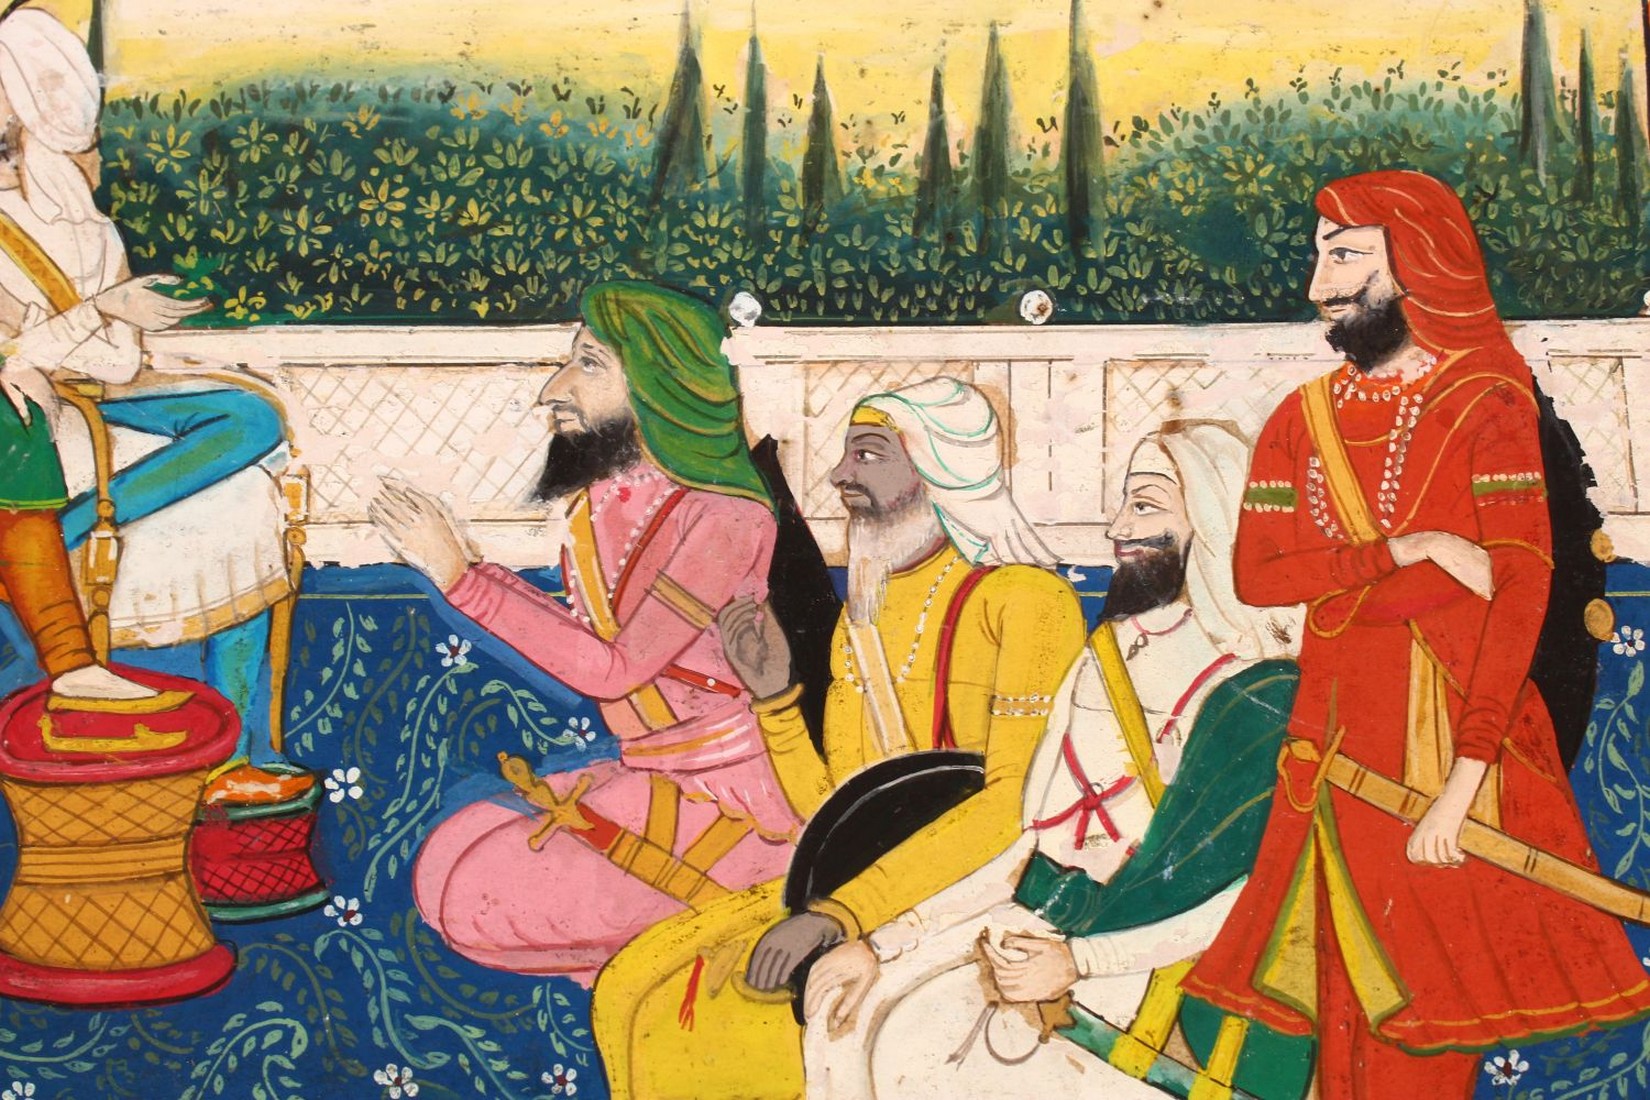 A FINE LARGE INDIAN MINIATURE PAINTING OF SIKH MAHARAJA RANJIT SINGH in court with attendants, - Image 3 of 7